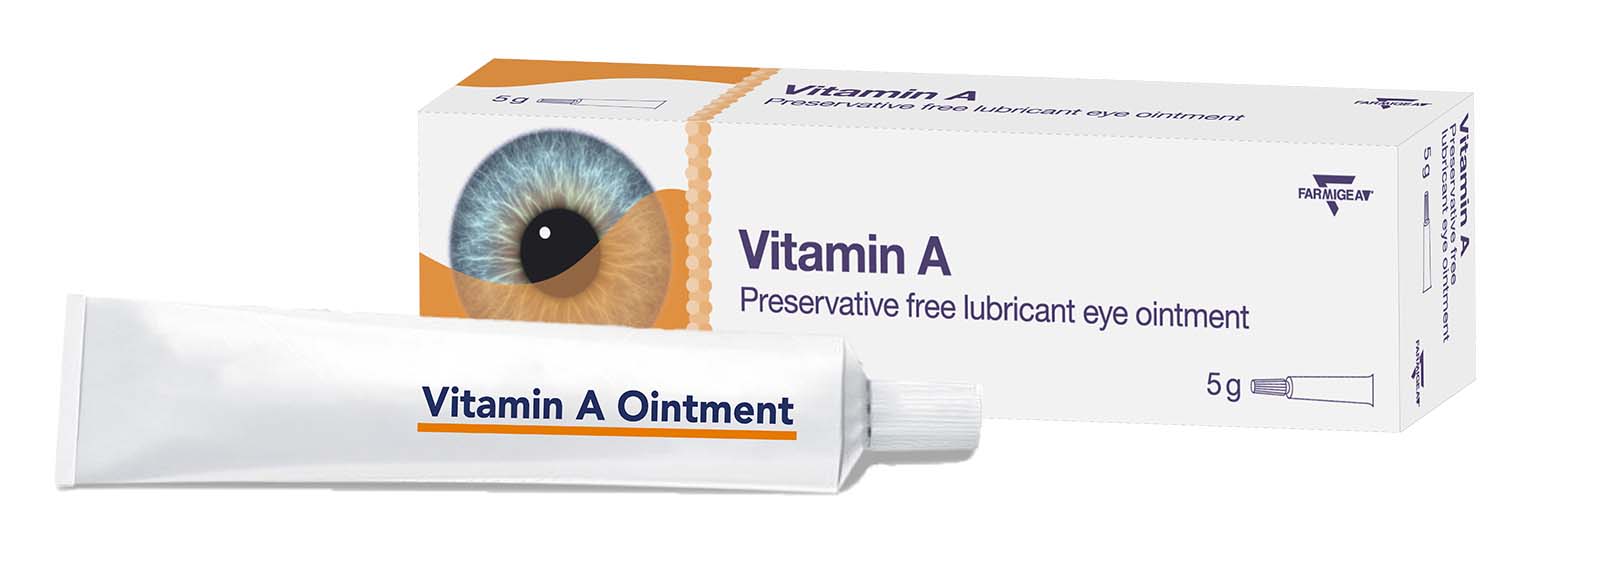 VitaminA, ophthalmic, ointment, private label